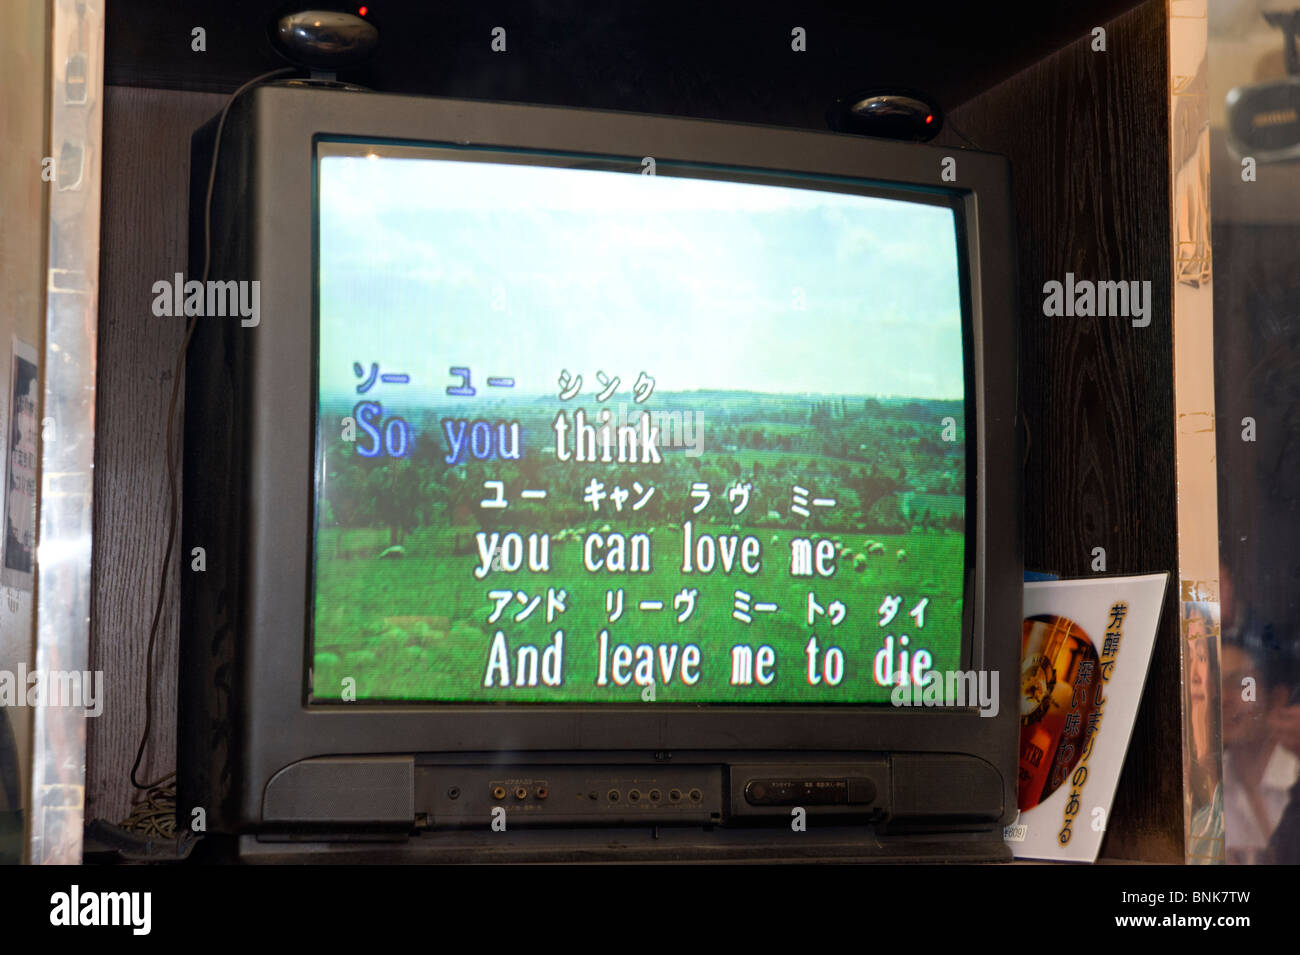 Karaoke Screen High Resolution Stock Photography and Images - Alamy